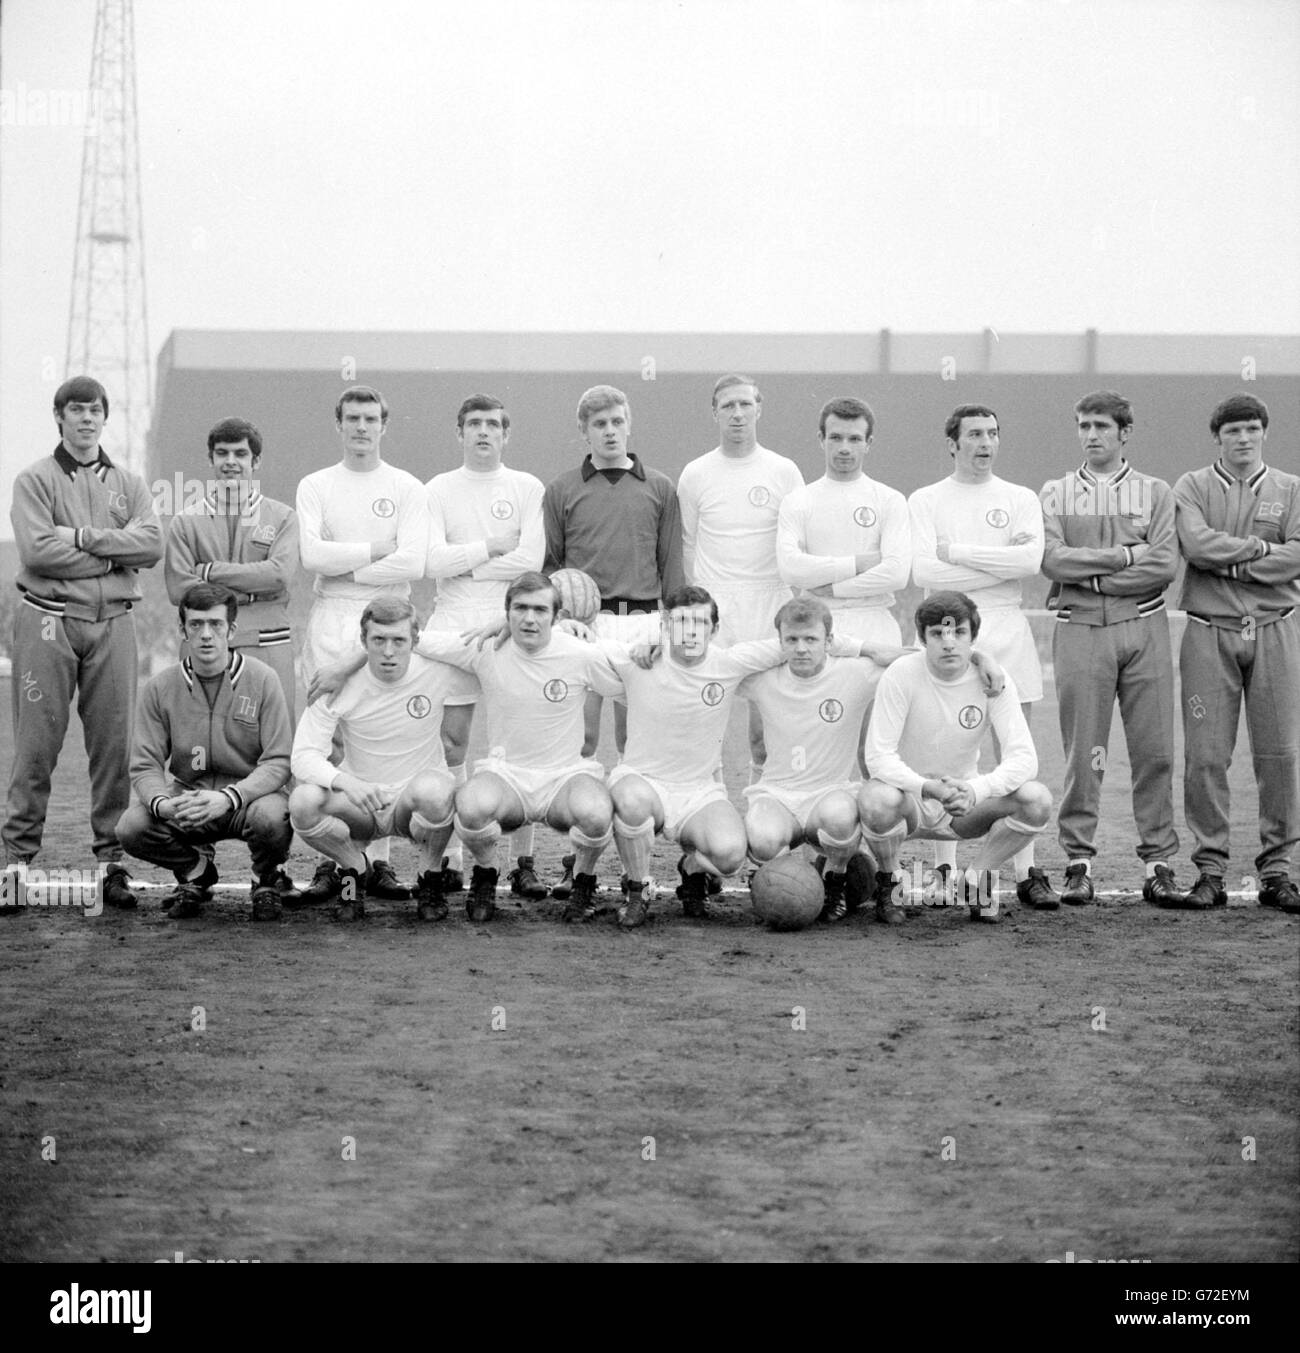 Members of Leeds Utd FC, the new 1969/1970 Football League champions with the record total of 67 points. The picture was taken at Elland Road, Leeds, after they beat Nottingham Forest 1-0 to bring their points total to the new record. Stock Photo